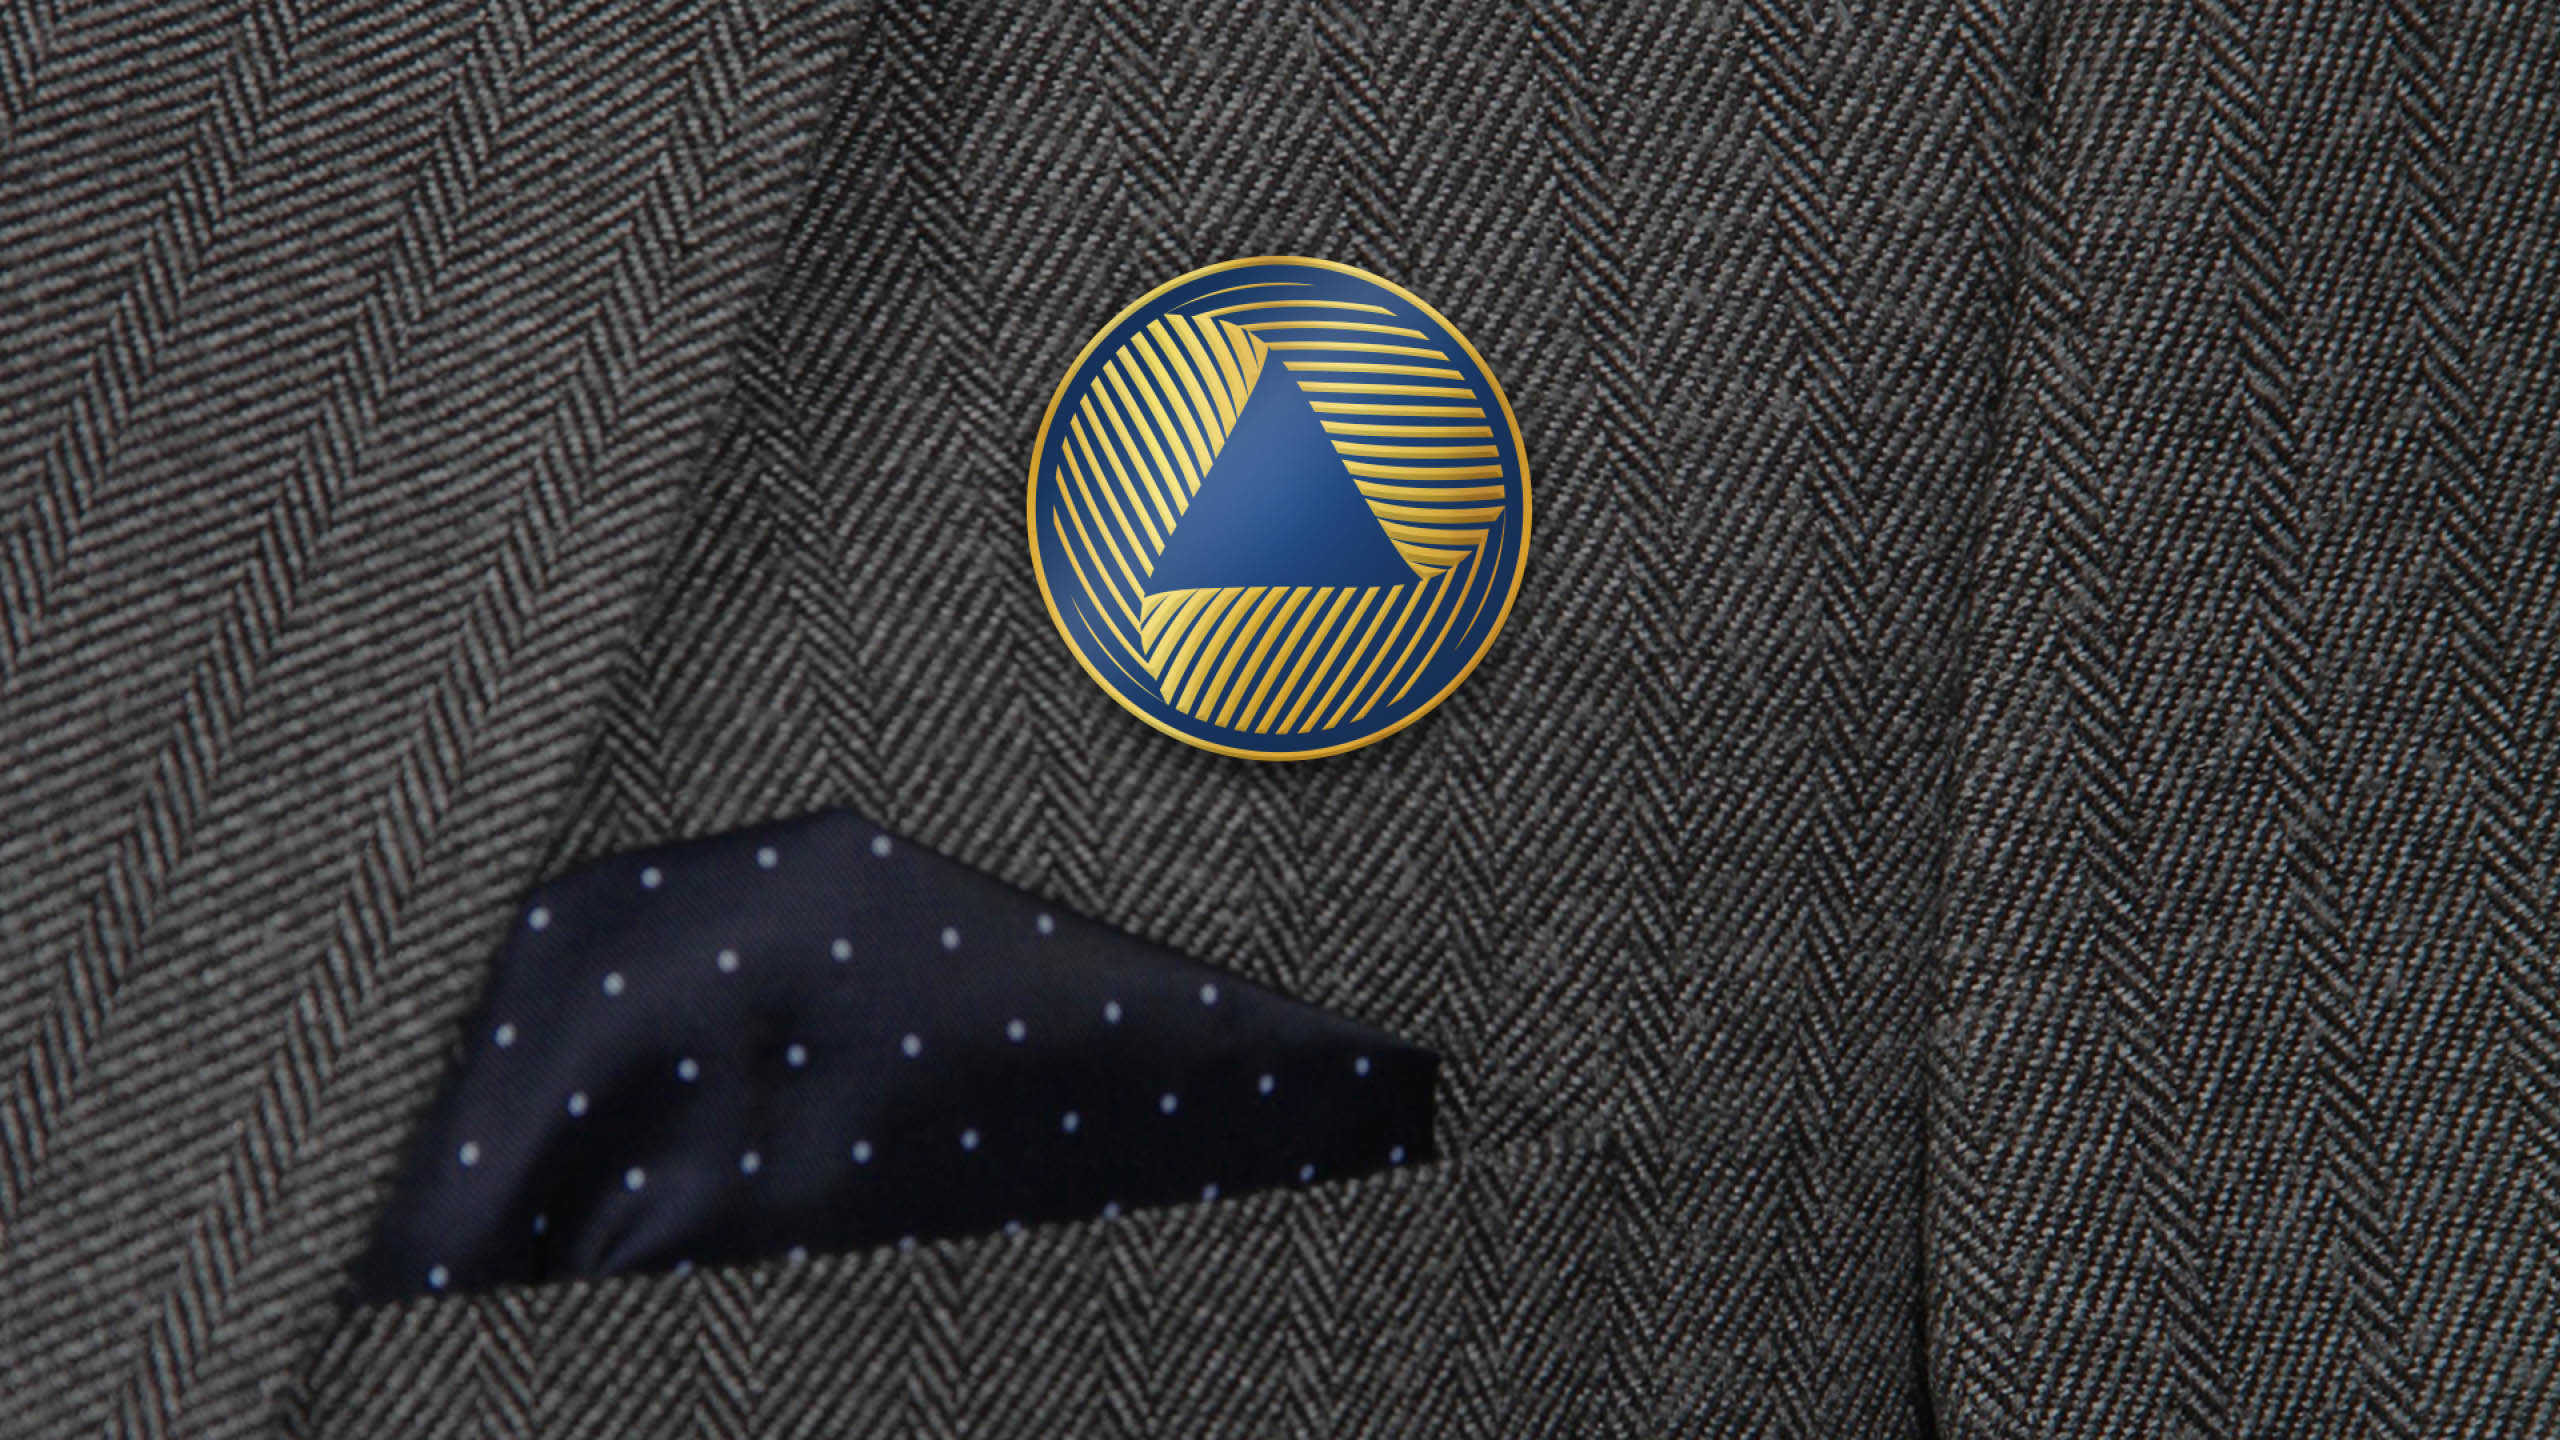 Corporate enamel pin and uniform for property developer brand Anchor Land